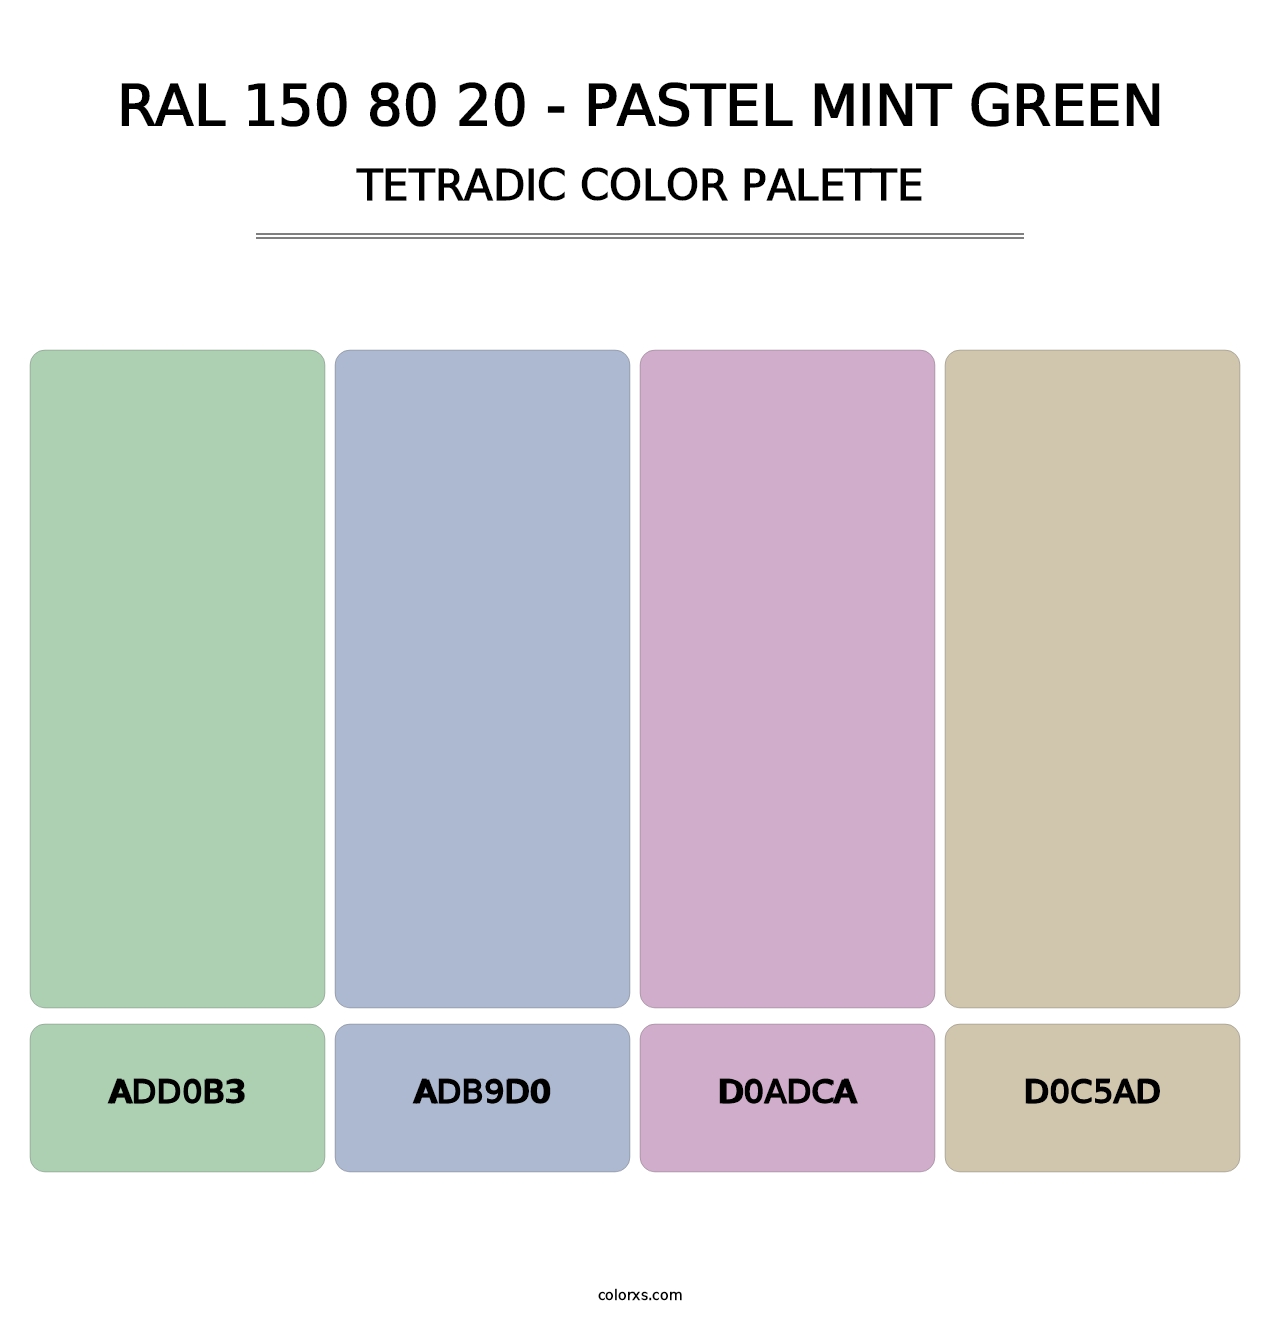 RAL 150 80 20 - Pastel Mint Green - Tetradic Color Palette